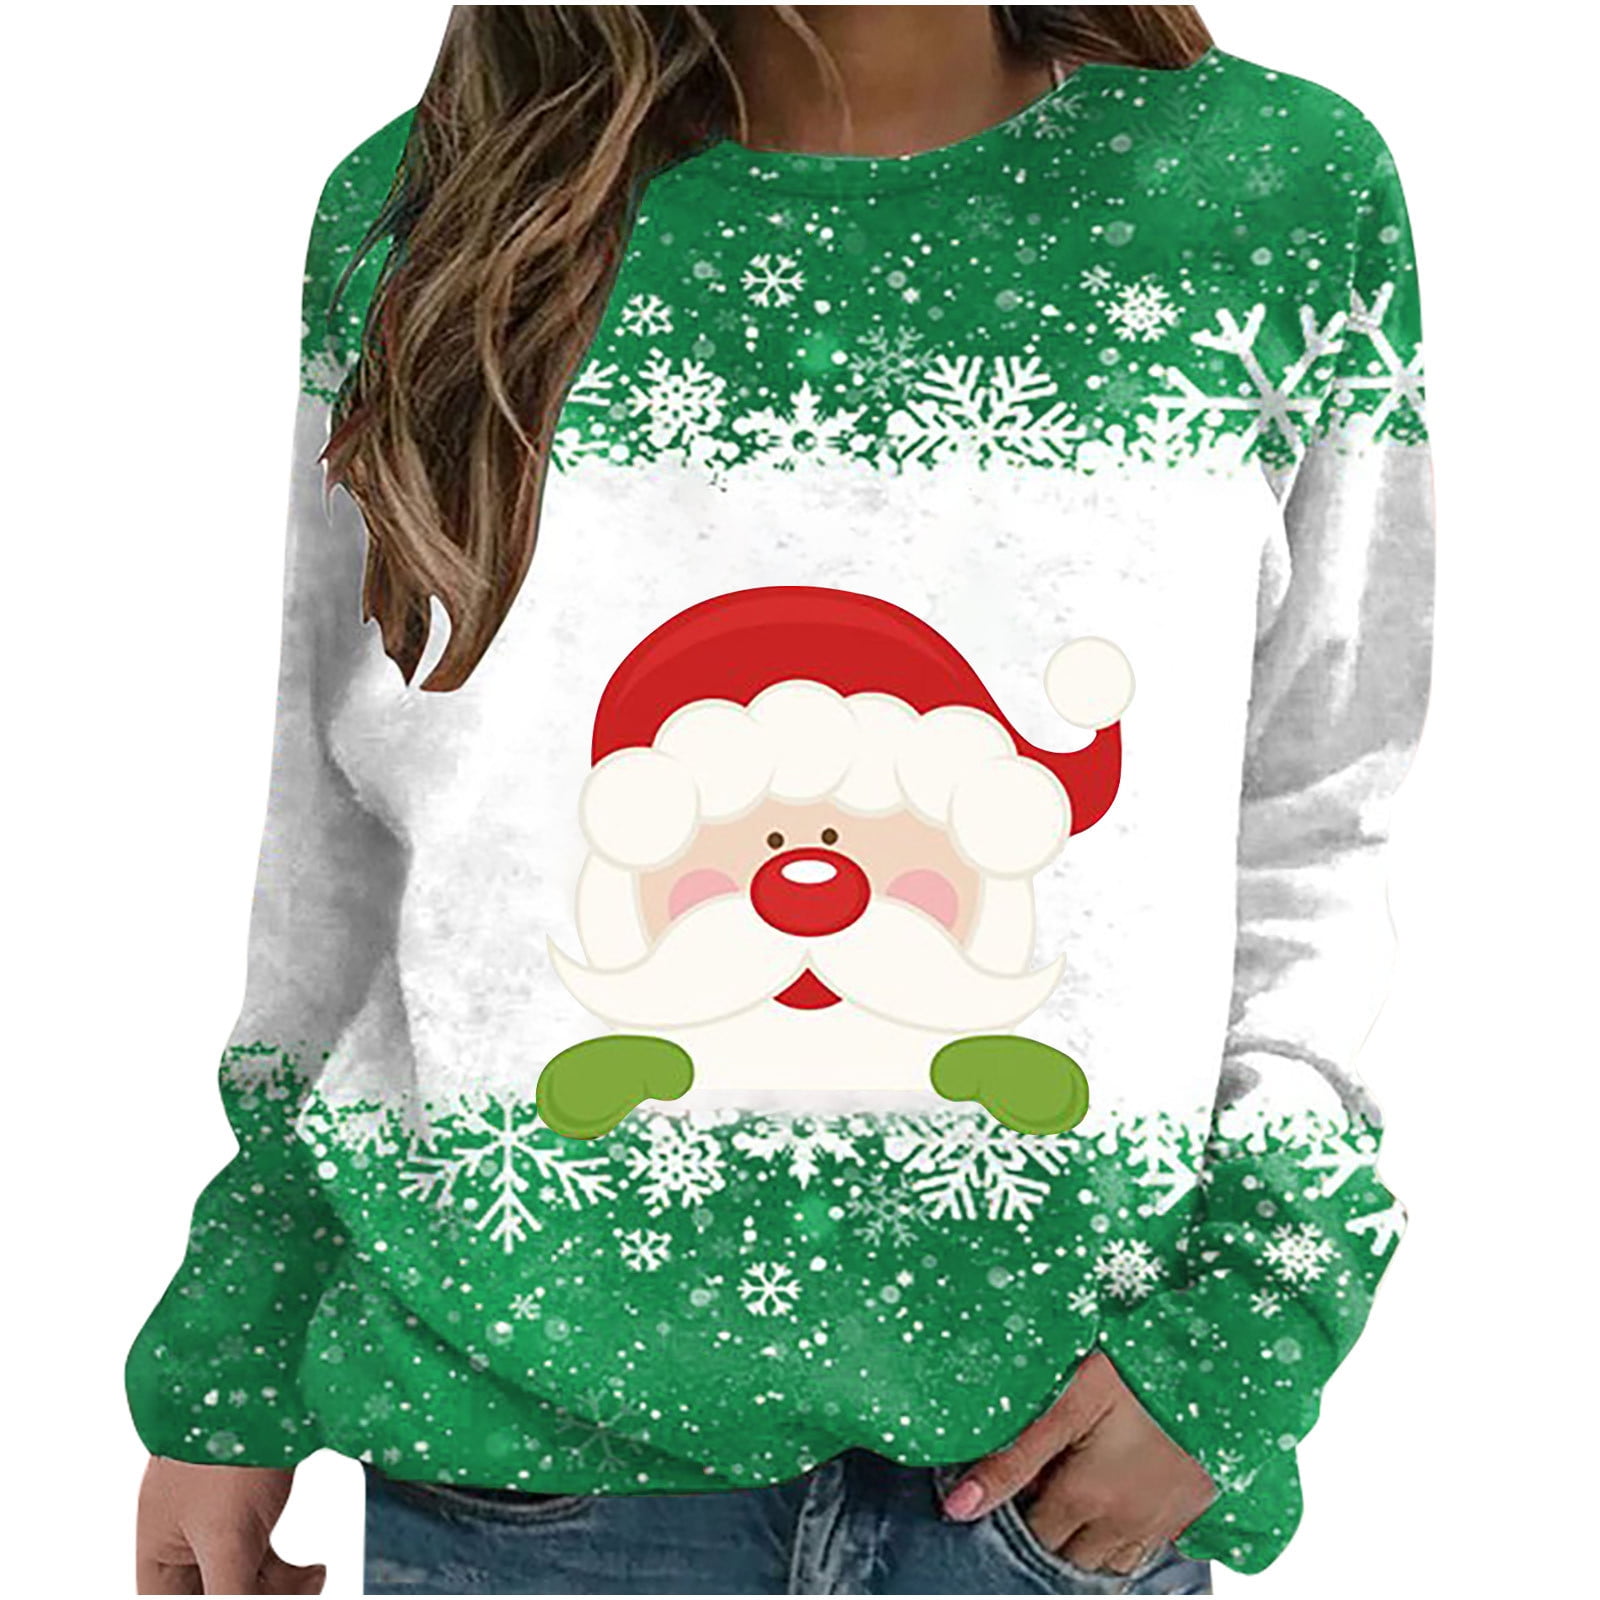 Ugly Christmas Sweater for Women Funny Cute Reindeer Sweatshirt Striped  Color Block Shirt Good Morning Shirt Best Gifts Womens Clothing Cheap  Clearance Sale 